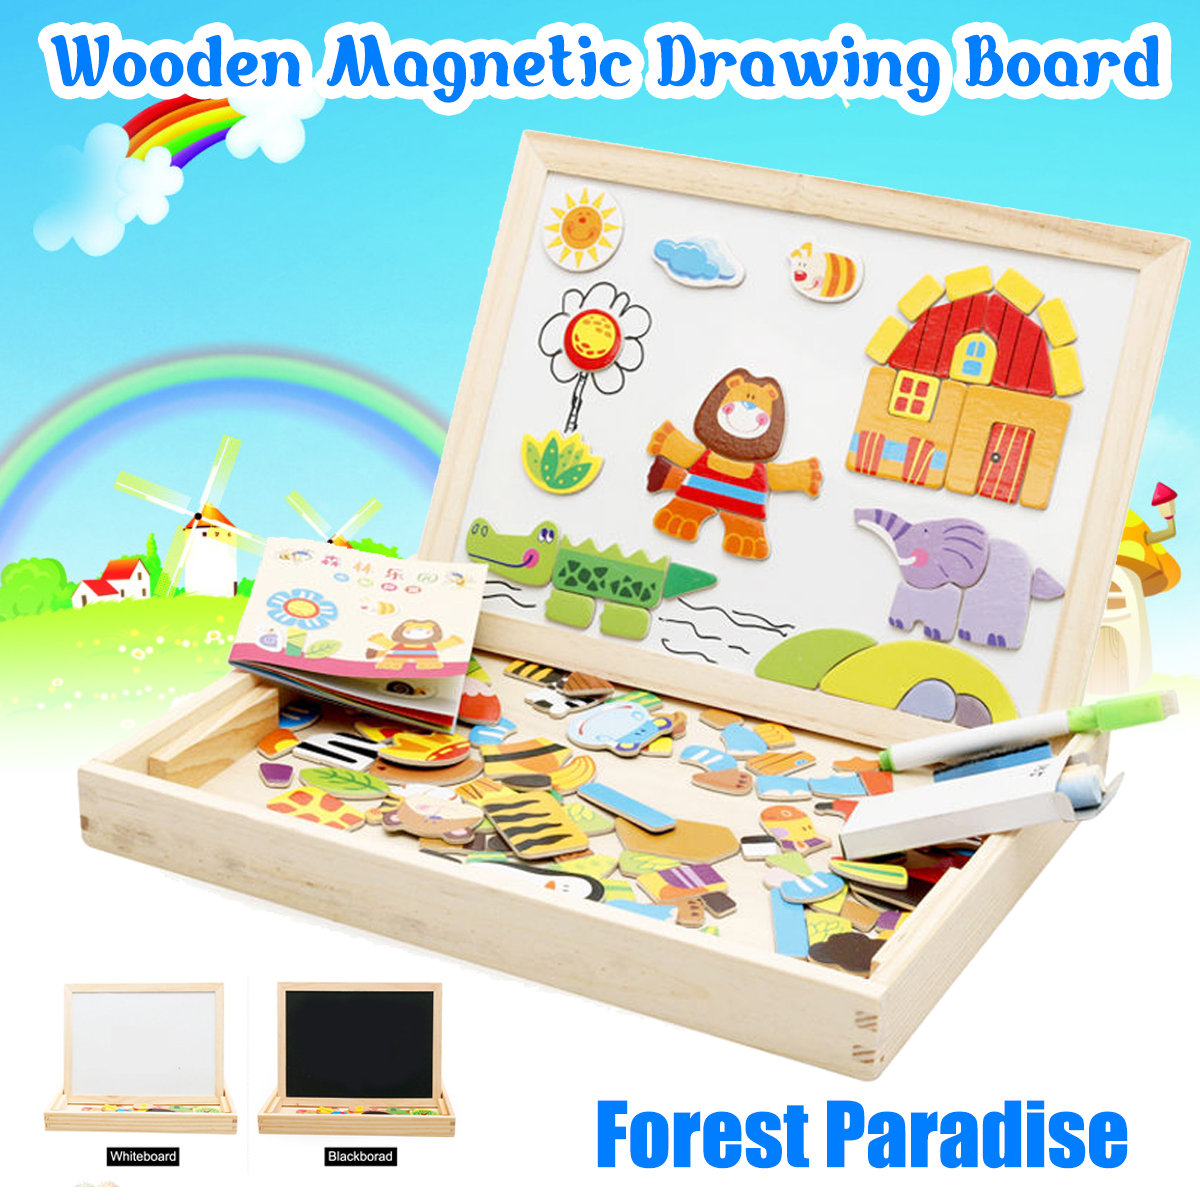 Wooden-DIY-Magnetic-Drawing-Board-Forest-Paradise-Childrens-Early-Educational-Learning-Toys-1676971-1